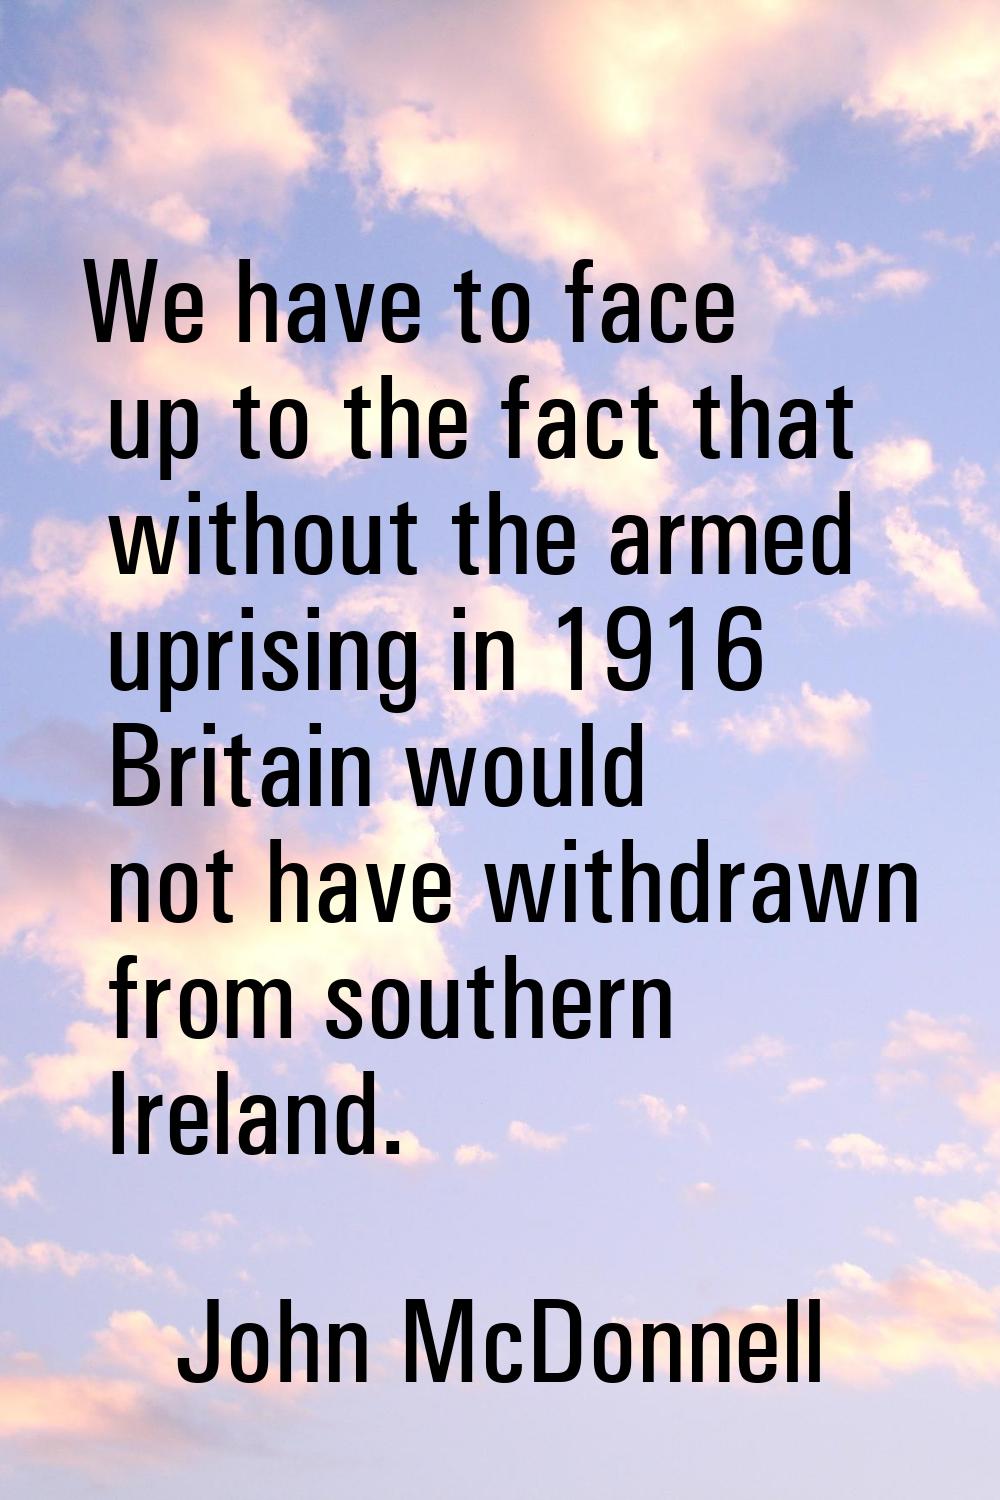 We have to face up to the fact that without the armed uprising in 1916 Britain would not have withd